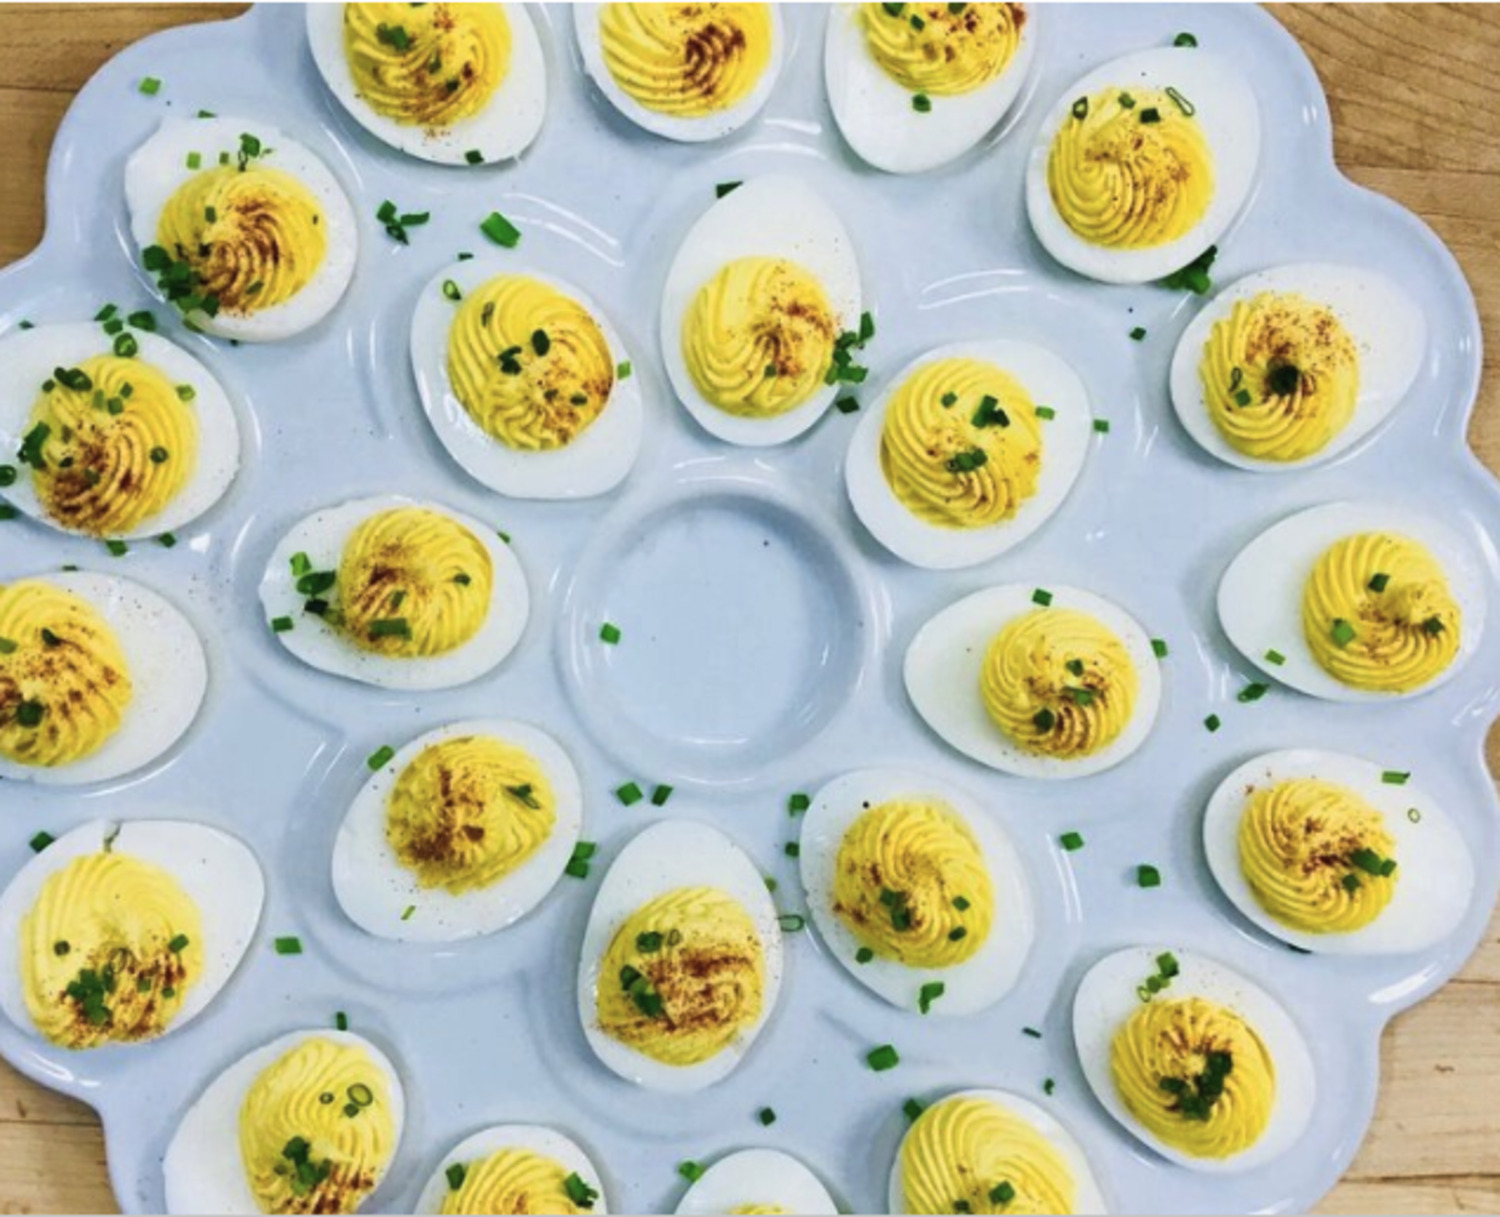 L&W Market's deviled eggs are ideal for Easter. COURTESY L&W MARKET